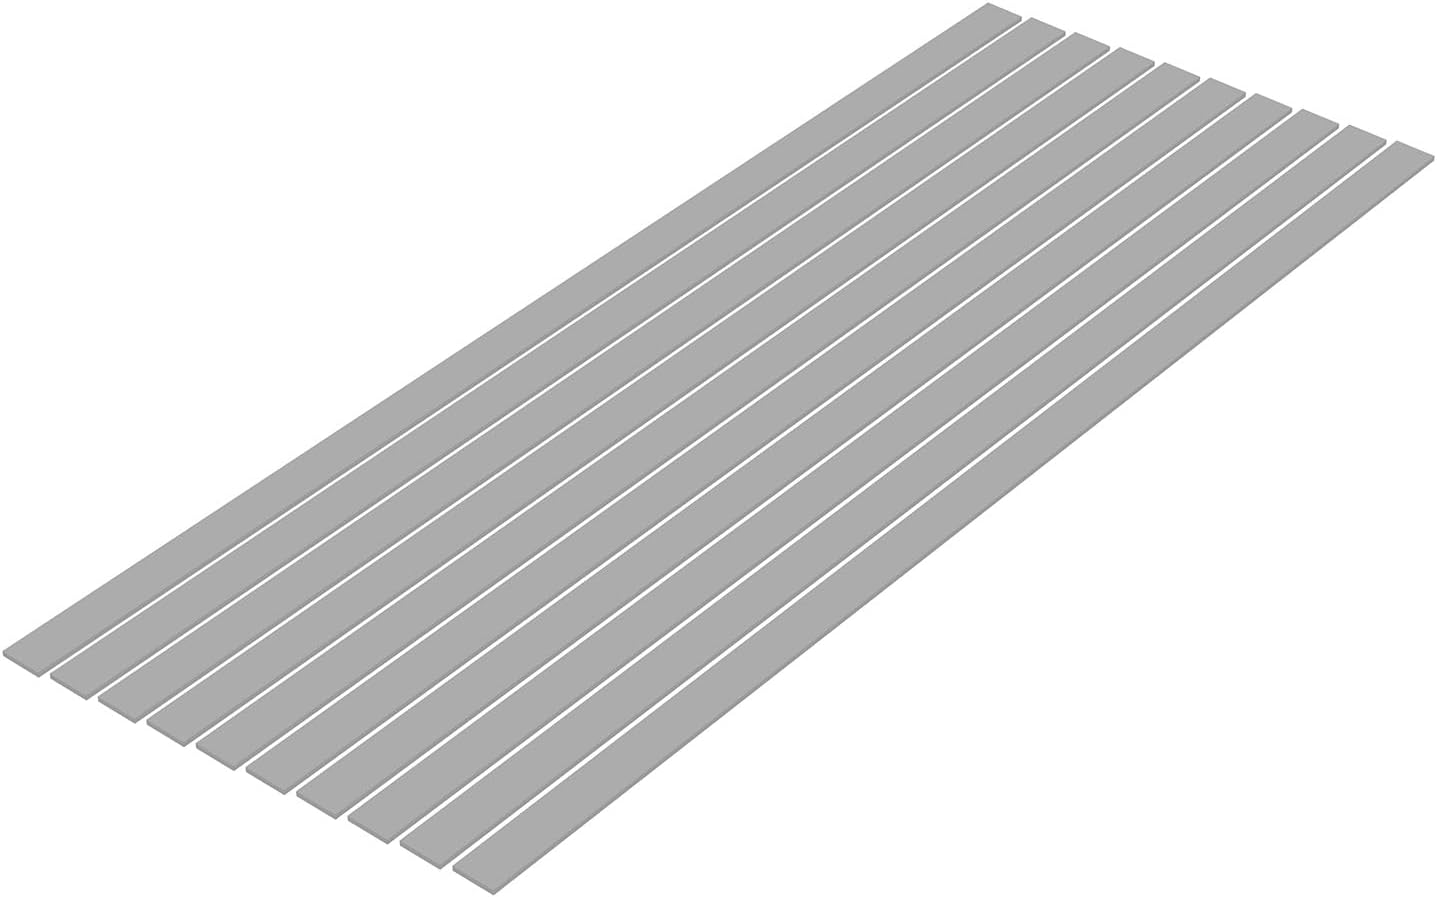 Wave Material Series OM-488 Plastic Material, Gray, Shredded Board, 0.04 x 0.31 inches (1.0 x 8.0 mm), 10 Pieces, Hobby Material - BanzaiHobby